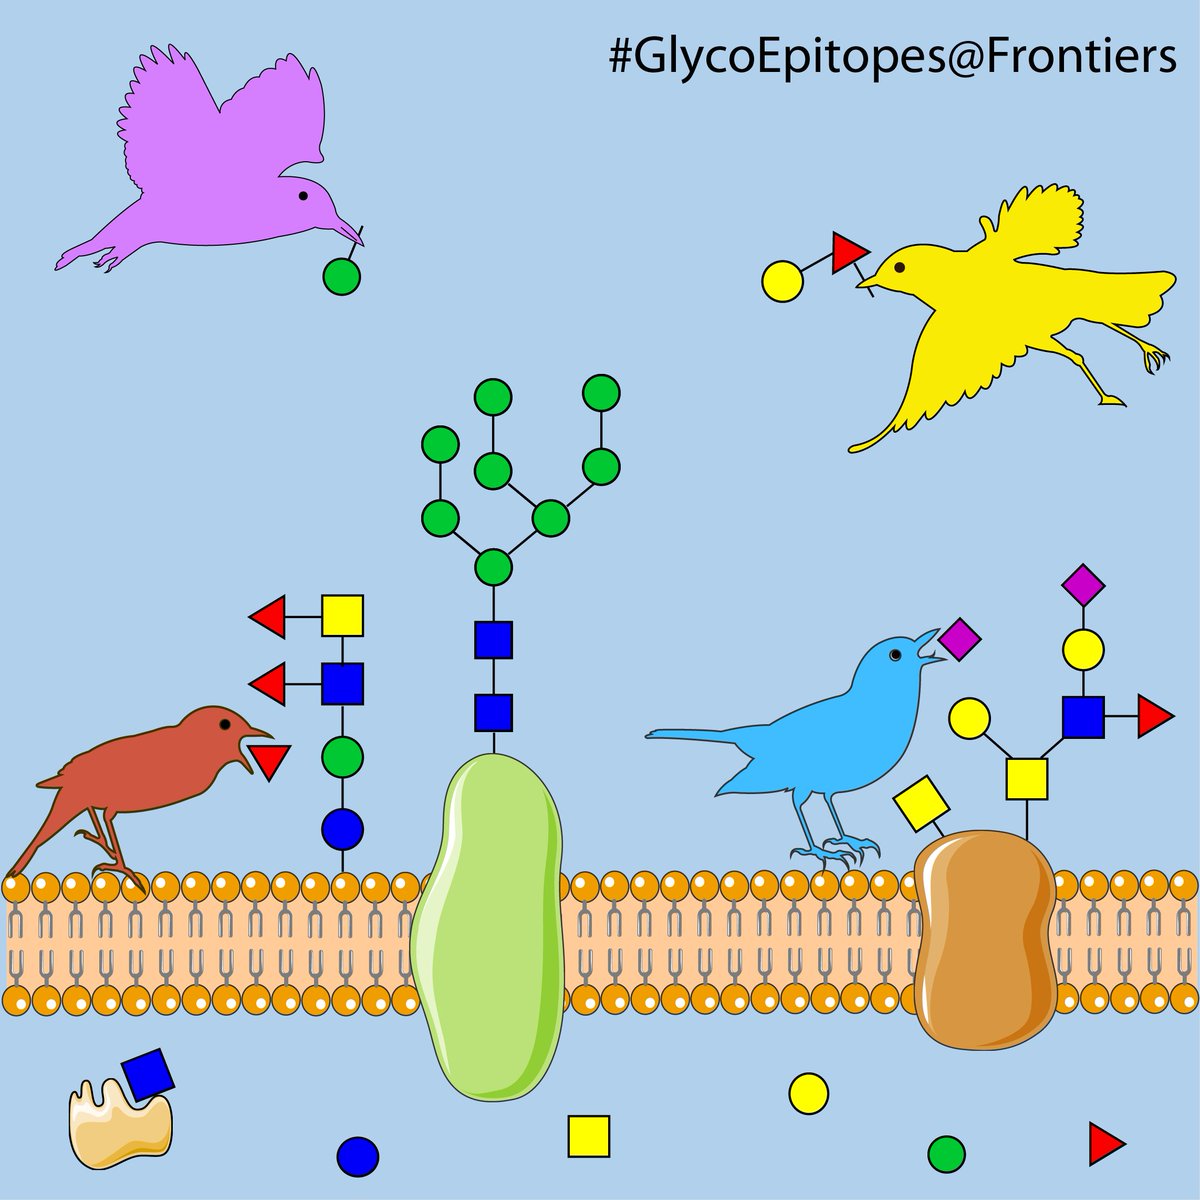 A new #glycotime Research Topic focusing on GlycoEpitopes is open for submission @FrontMolBioSci. Abstract deadline: 13 April 2021/ Manuscript: 11 August 2021. @bandigiu @GuerardelY @Galoon34158660 
frontiersin.org/research-topic…